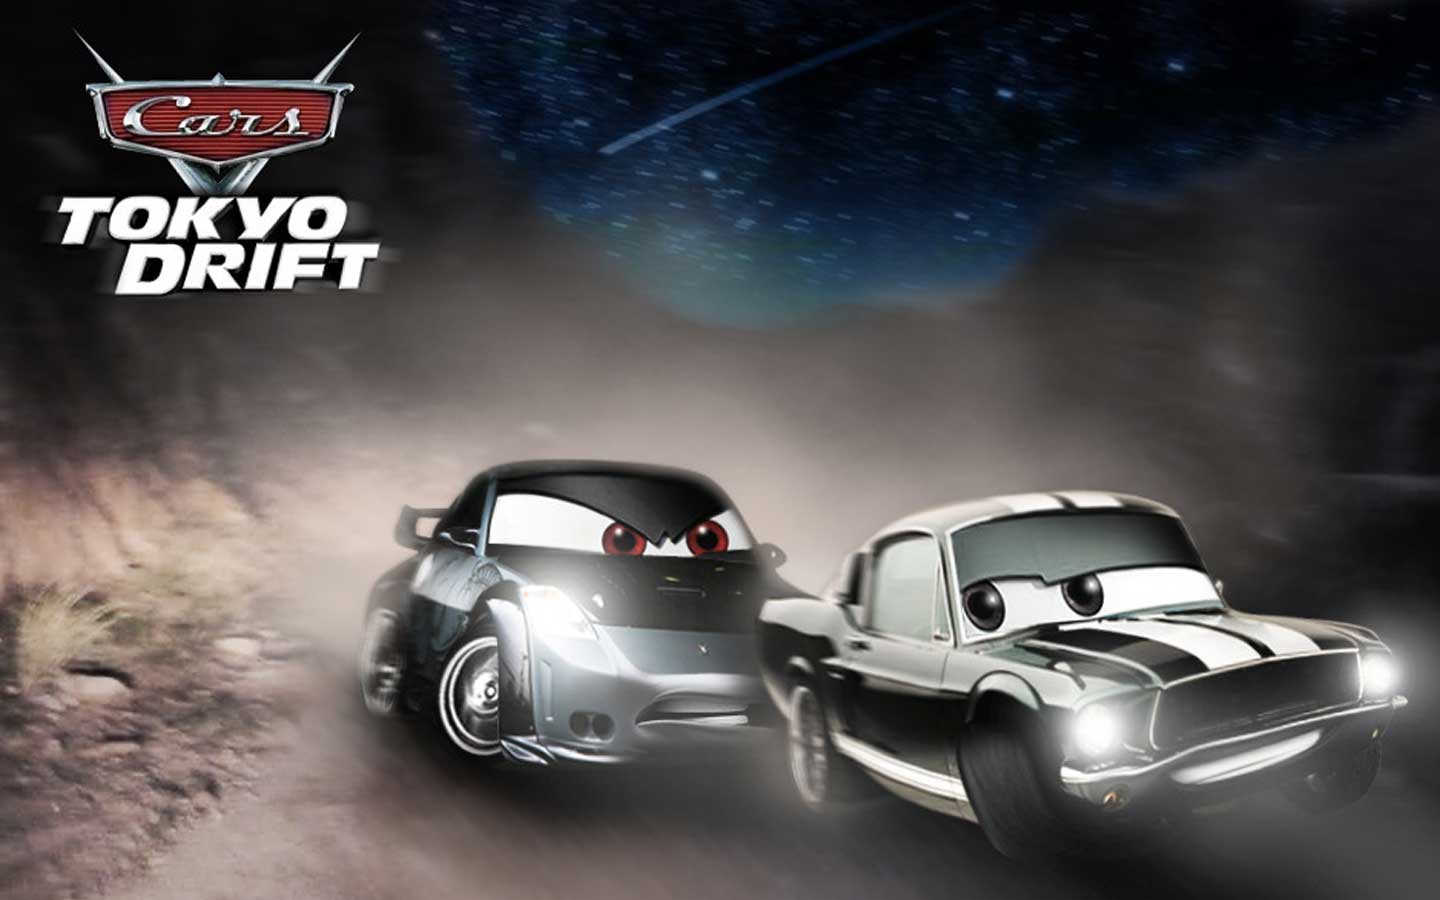 Tokyo Drift Cars Wallpapers Hd Wallpapers in Cars Imagescicom